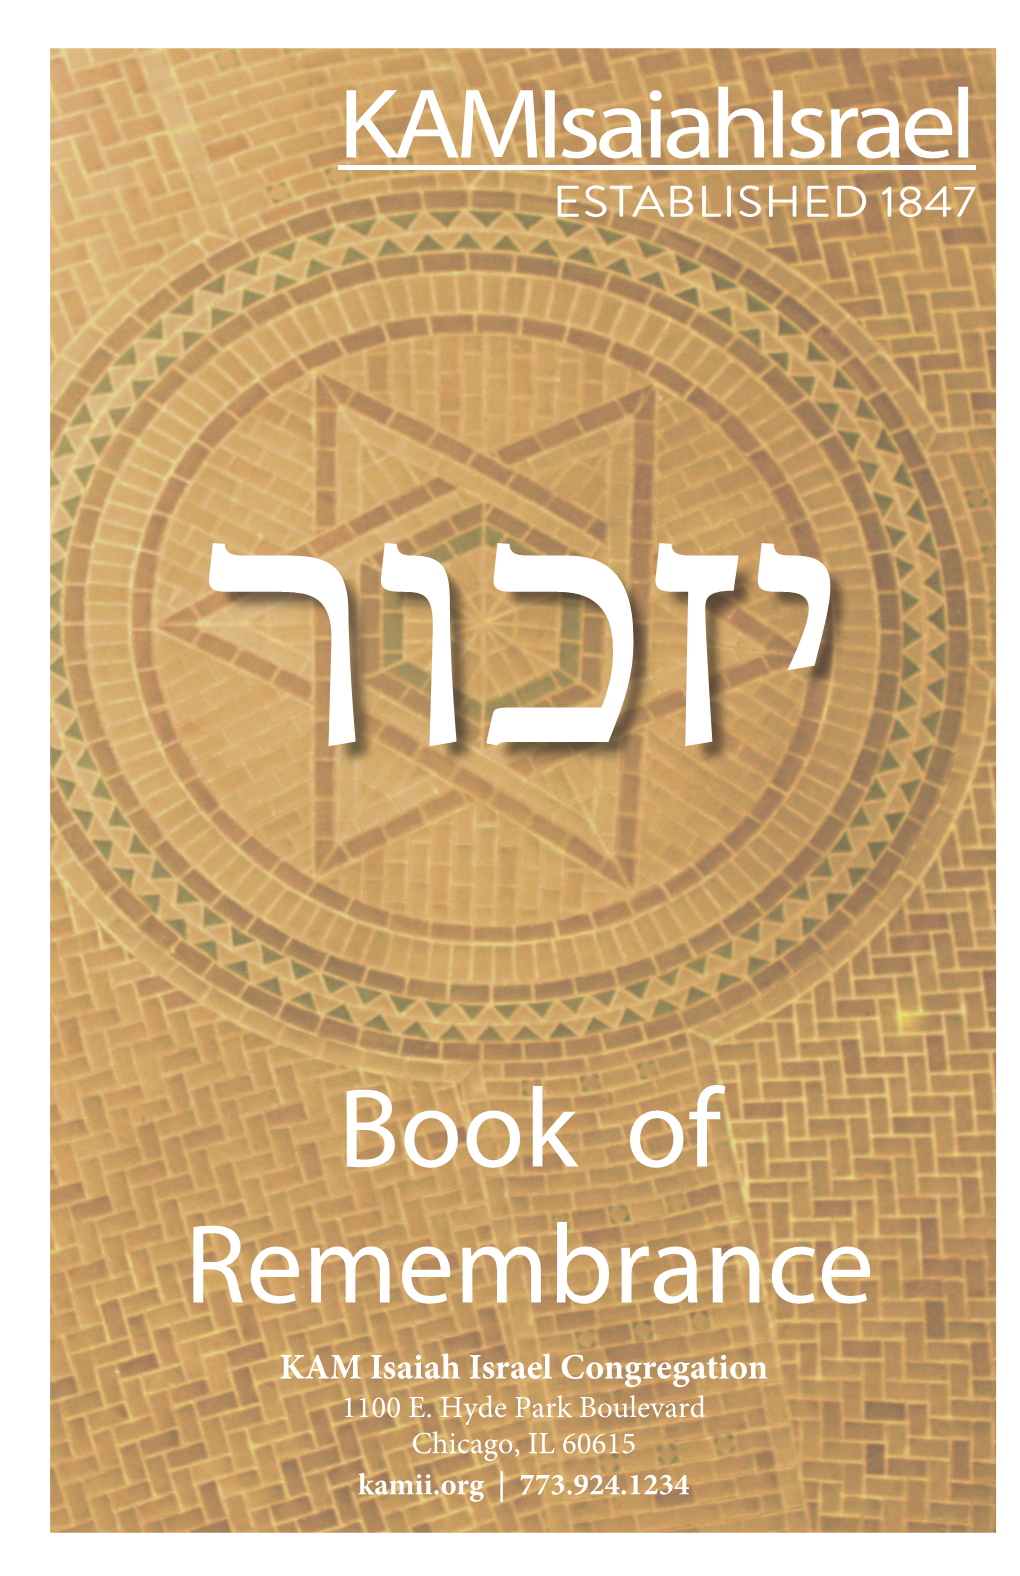 Book of Remembrance KAM Isaiah Israel Congregation 1100 E